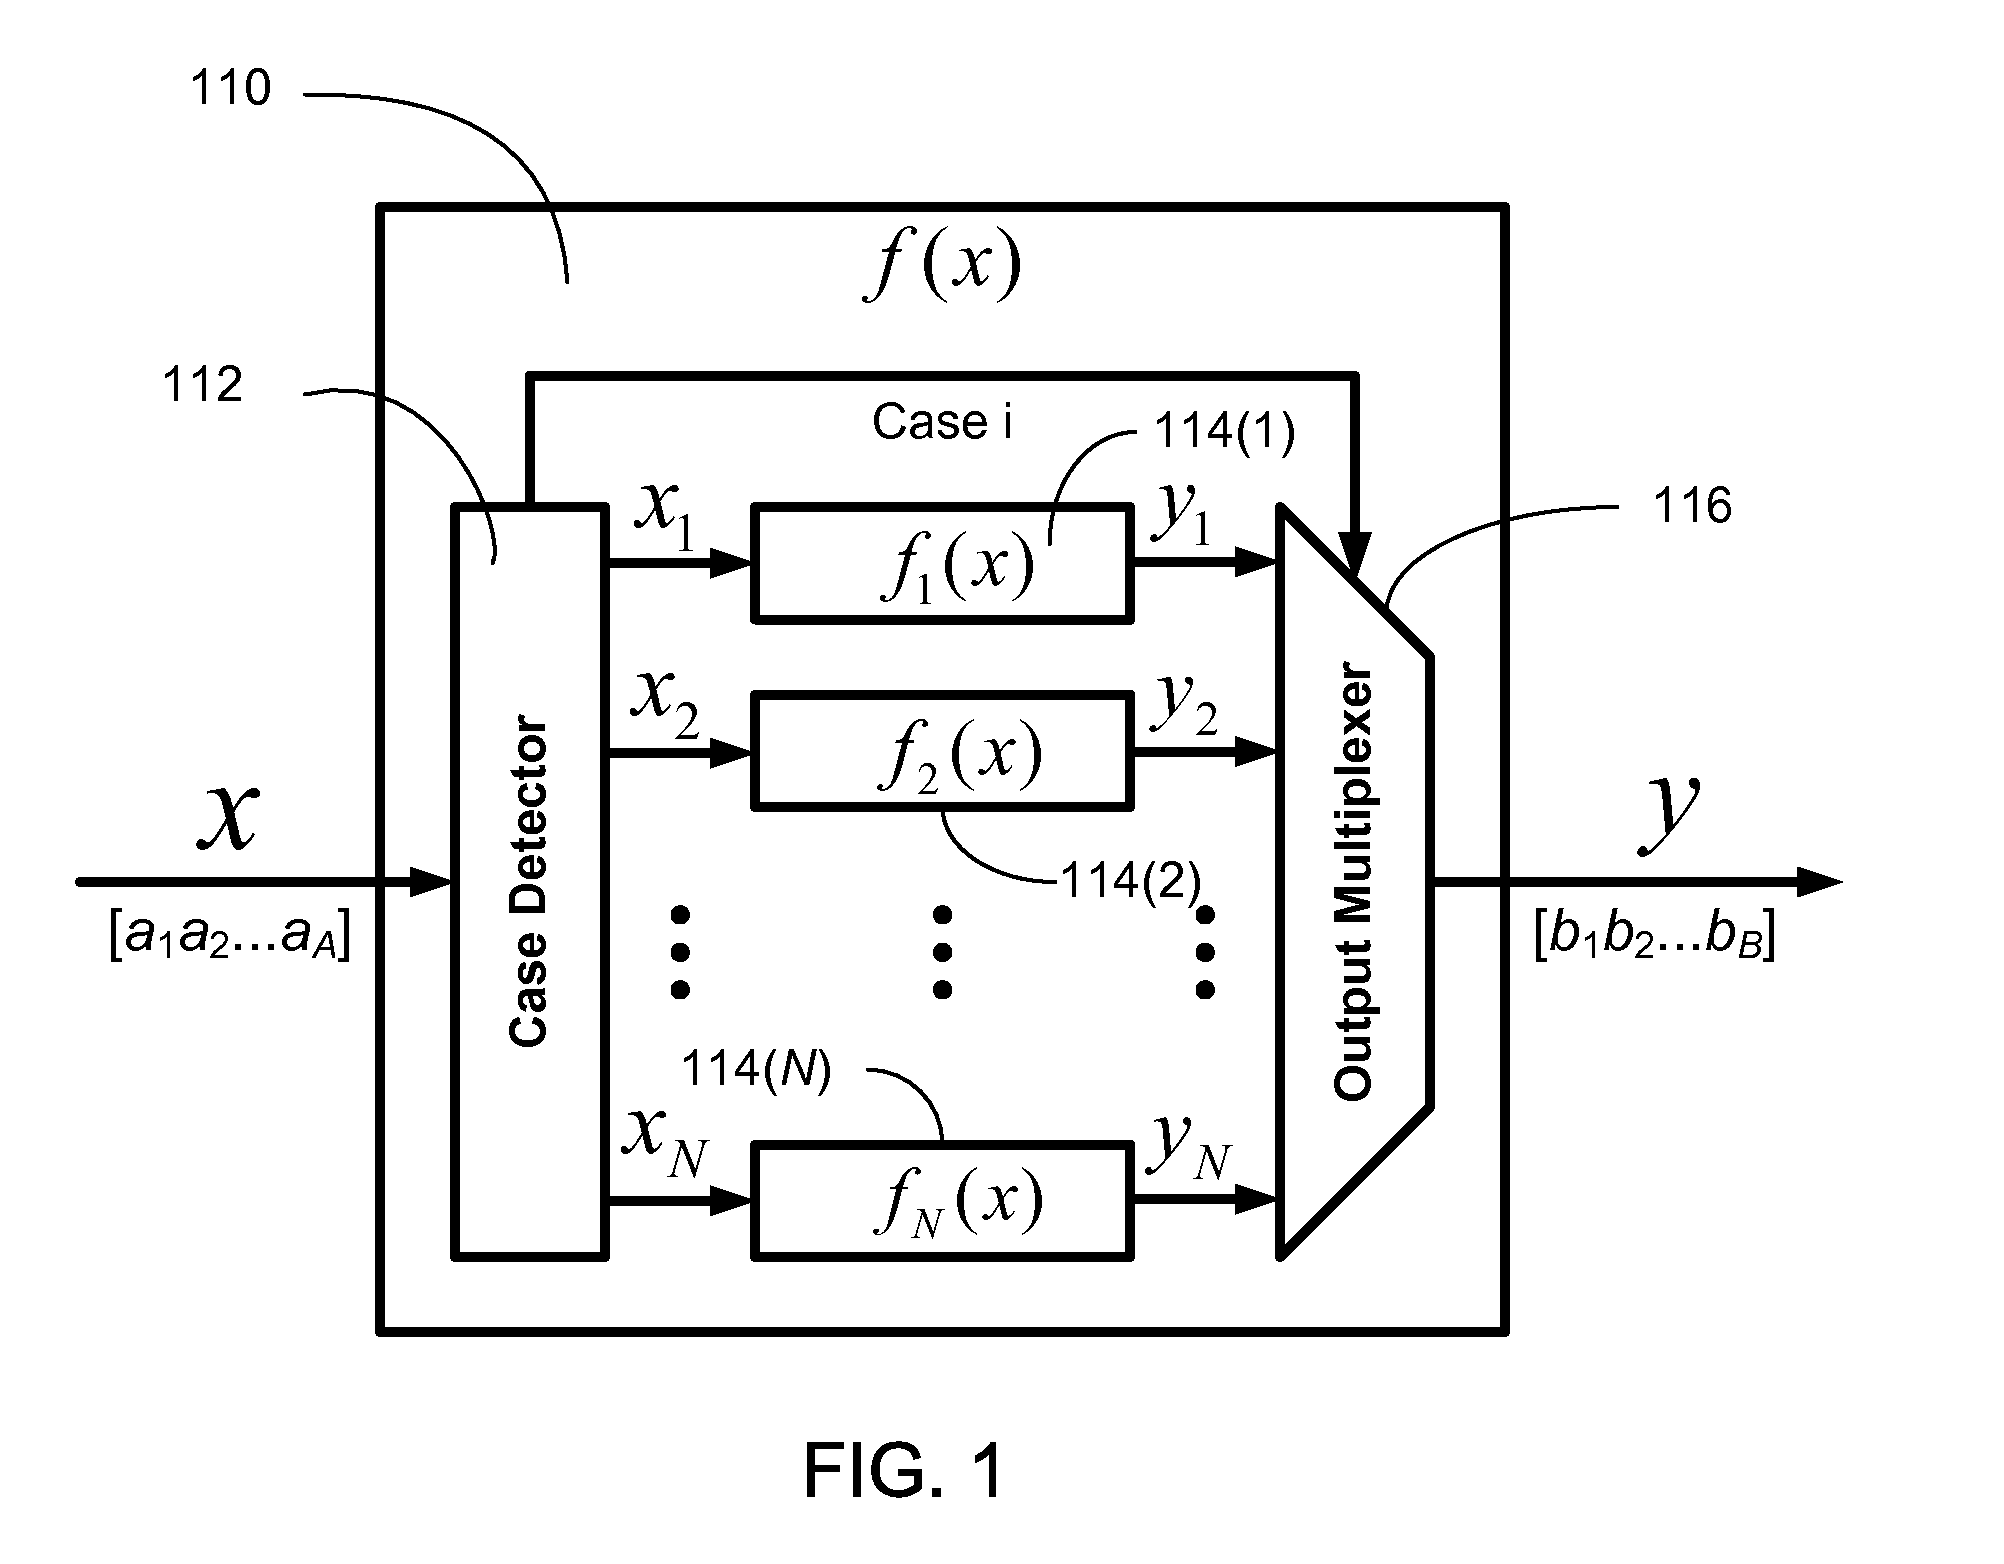 Efficient Function Generator Using Case Detection and Output Selection